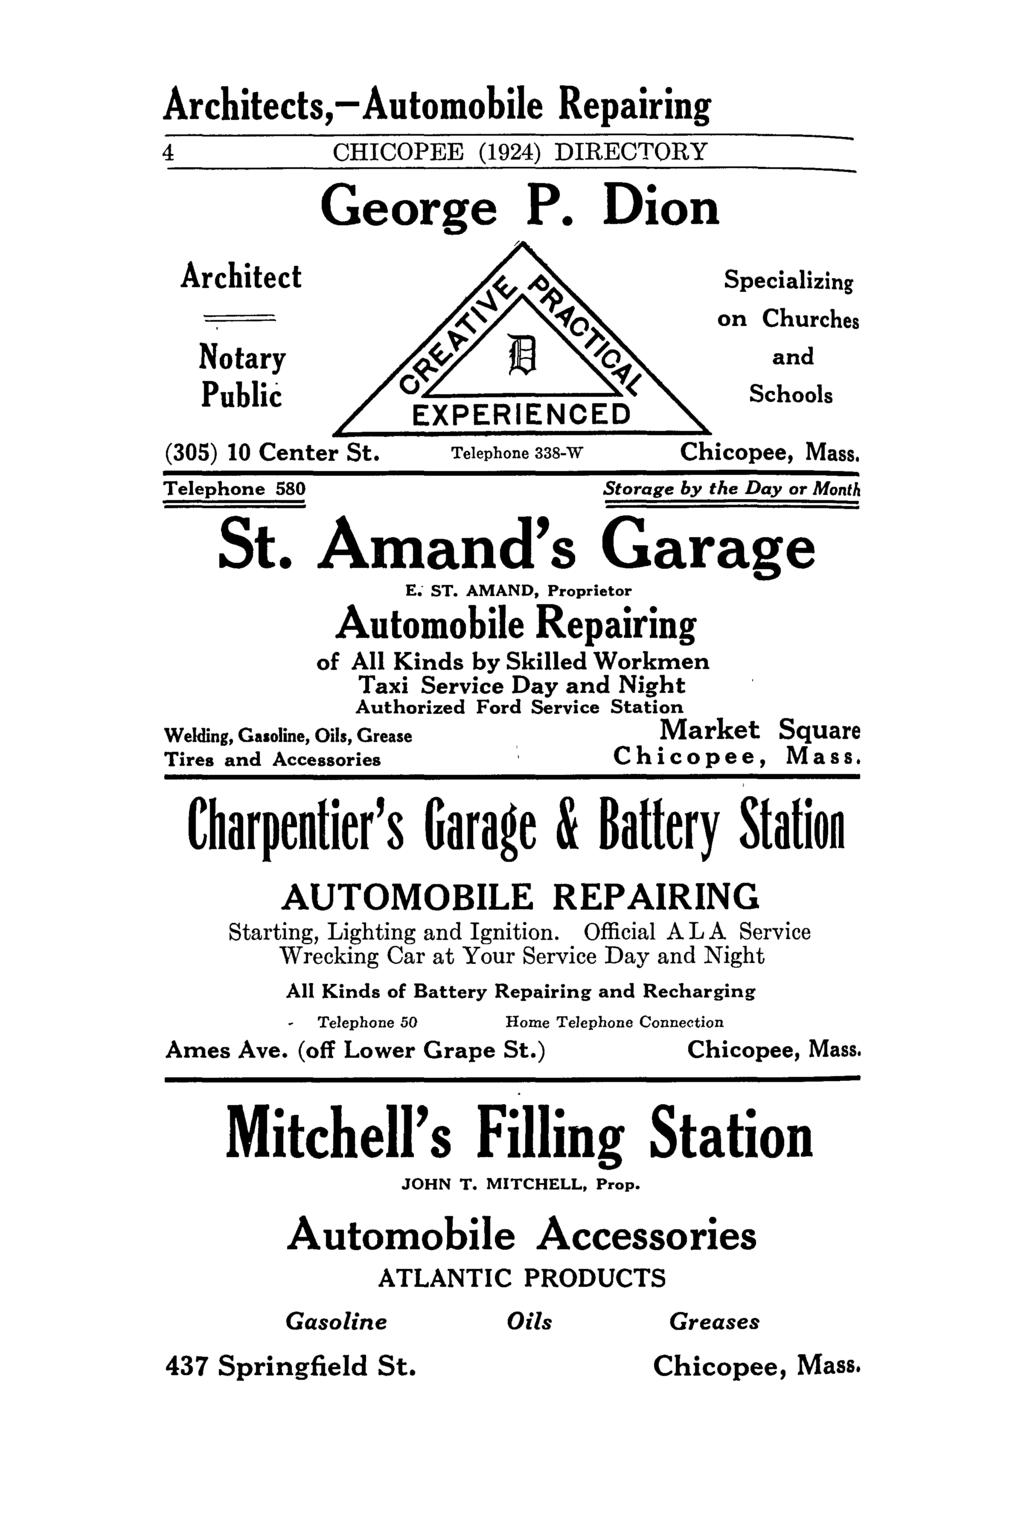 Architects, - Automobile Repairing 4 Architect Notary Public CHICOPEE (1924) DIRECTORY George P. Dion " Specializing on Churches and Schools (305) 10 Center St. Telephone 338-W Chicopee, Mass.